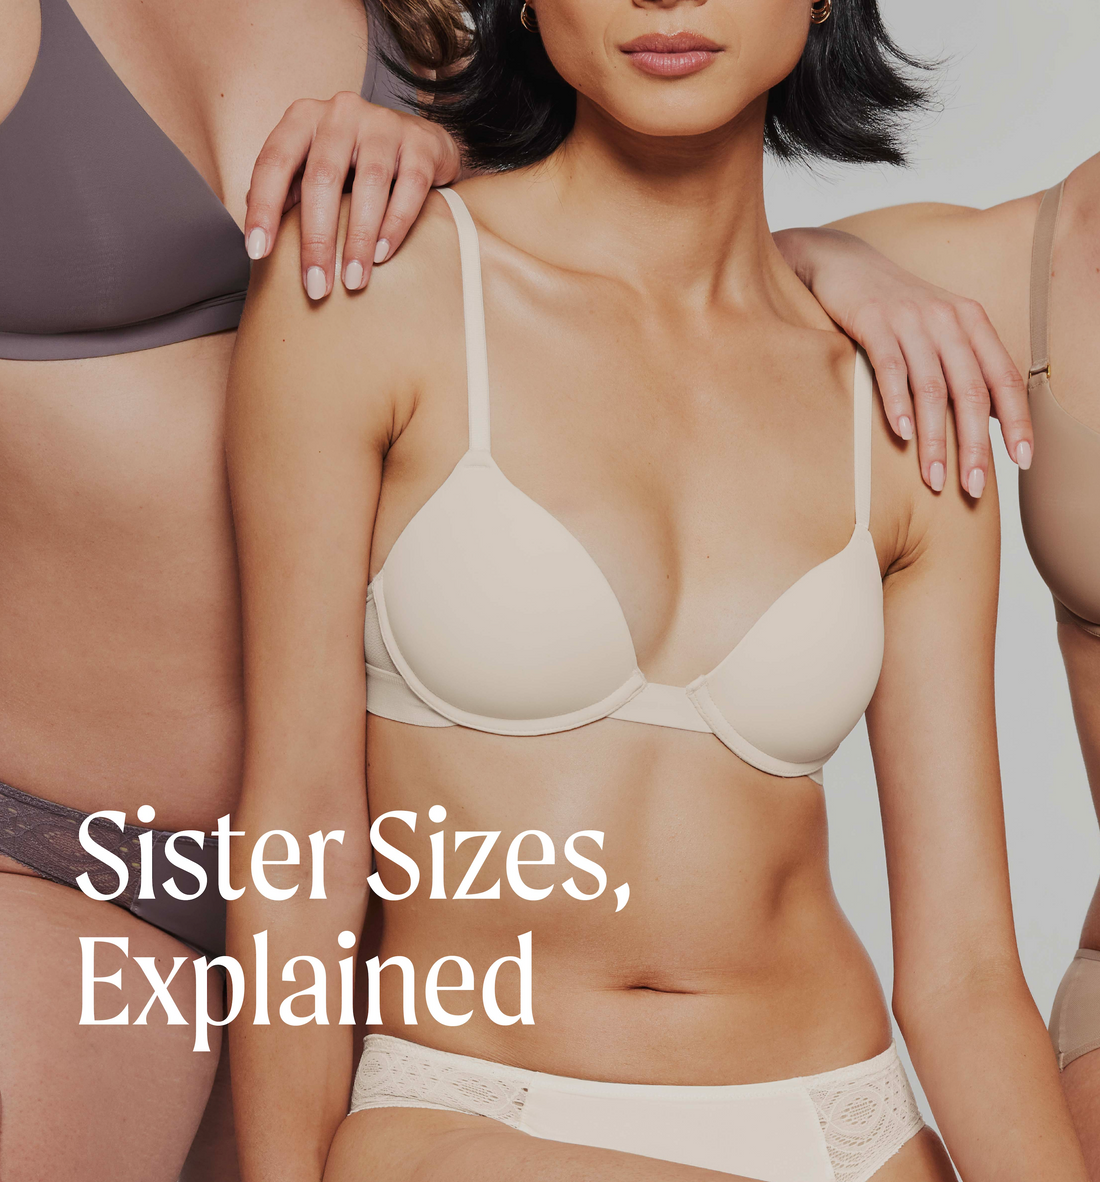 Do you know your bra has something called a sister size?' These